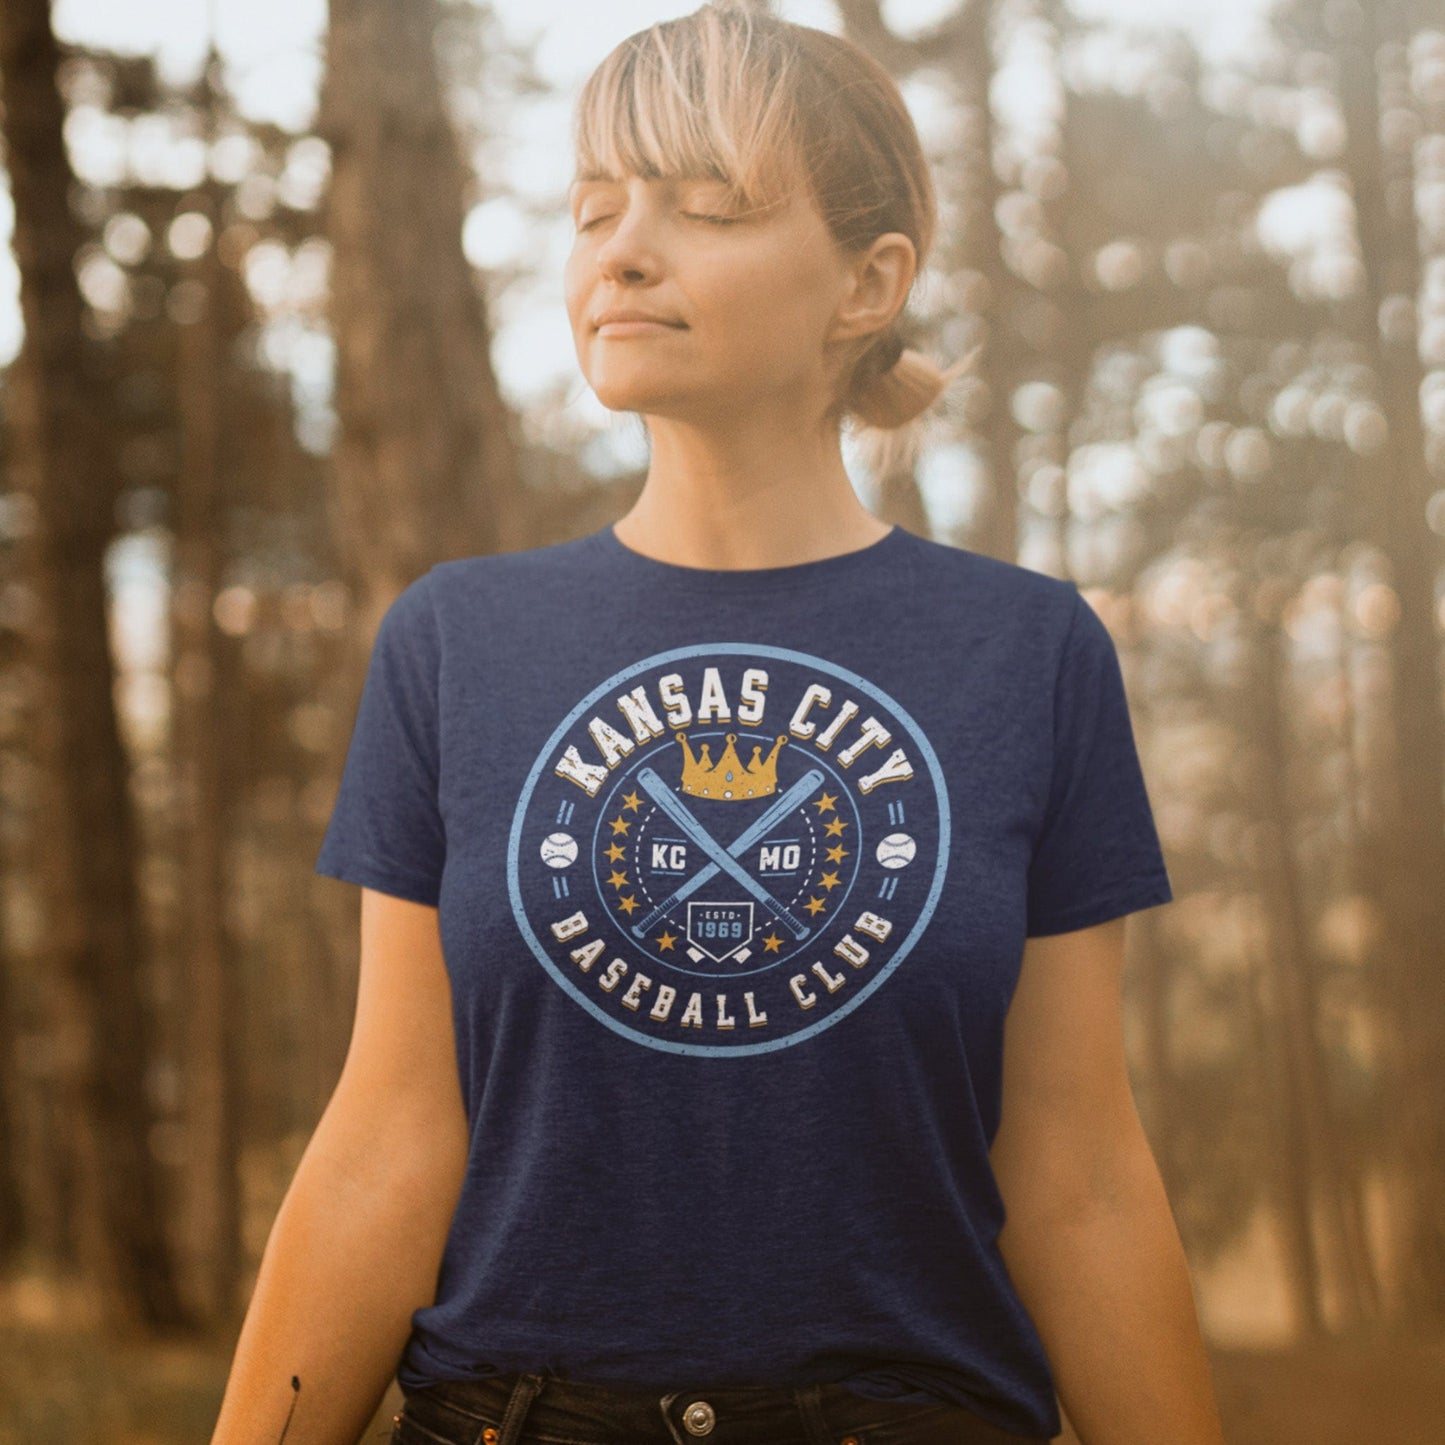 KC Swag Kansas City Royals blue, gold, white KC BASEBALL CLUB on heather navy unisex t-shirt worn by female model standing in warm wooded area